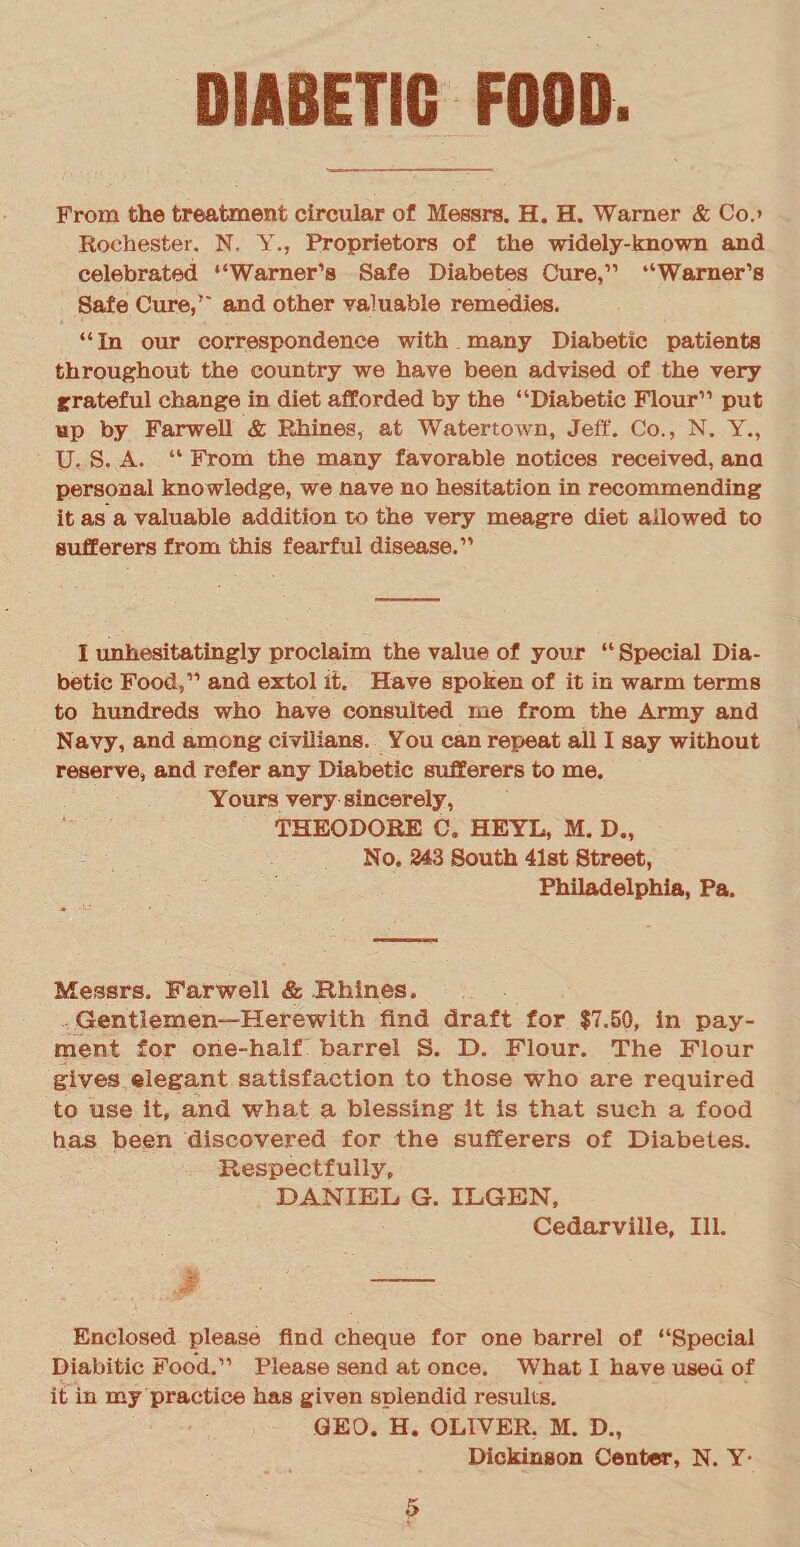 From the treatment circular of Messrs. H. H. Warner & Co.» Rochester. N. Y., Proprietors of the widely-known and celebrated “Warner’s Safe Diabetes Cure,” “Warner’s Safe Cure,” and other valuable remedies. “In our correspondence with many Diabetic patients throughout the country we have been advised of the very grateful change in diet afforded by the “Diabetic Flour” put up by Farwell & Blaines, at Watertown, Jeff. Co., N. Y., U. S. A. “ From the many favorable notices received, ana personal knowledge, we nave no hesitation in recommending it as a valuable addition to the very meagre diet allowed to sufferers from this fearful disease.” I unhesitatingly proclaim the value of your “ Special Dia¬ betic Food,” and extol it. Have spoken of it in warm terms to hundreds who have consulted me from the Army and Navy, and among civilians. You can repeat all I say without reserve, and refer any Diabetic sufferers to me. Yours very sincerely, THEODORE C. HEYL, M. D., No. 243 South 41st Street, Philadelphia, Pa. Messrs. Farwell & Rhlnes. Gentlemen—Herewith find draft for $7.50, in pay¬ ment for one-half barrel S. D. Flour. The Flour gives elegant satisfaction to those who are required to use it, and what a blessing it is that such a food has been discovered for the sufferers of Diabetes. Respectfully, DANIEL G. ILGEN, Cedarville, Ill. Enclosed please find cheque for one barrel of “Special Diabitic Food.” Please send at once. What I have used of it in my practice has given splendid results. GEO. H. OLIVER. M. D., Dickinson Center, N. Y*